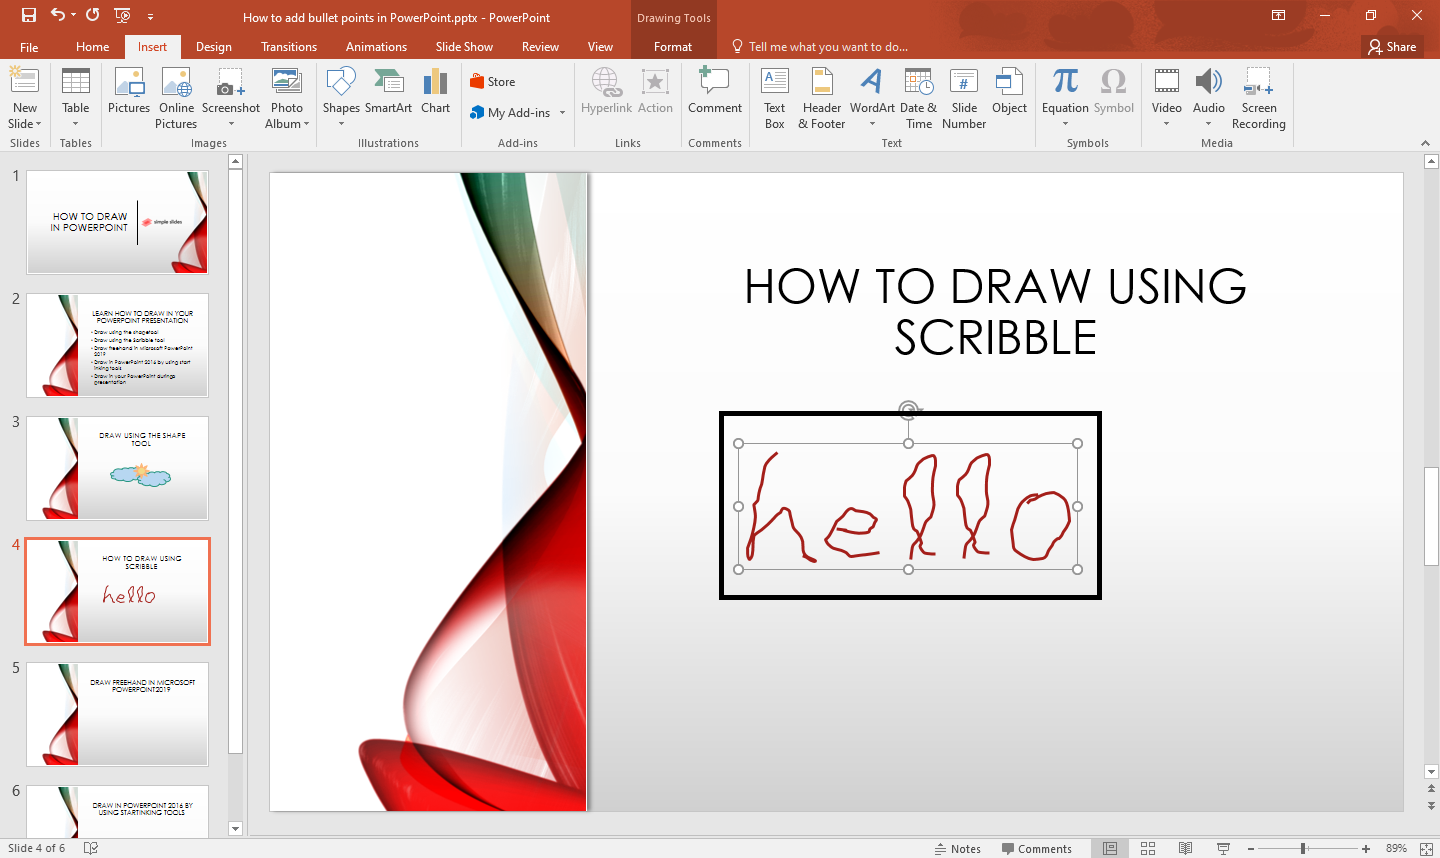 once you click scribble tool, you can now draw freehand shapes on your presentation slide.